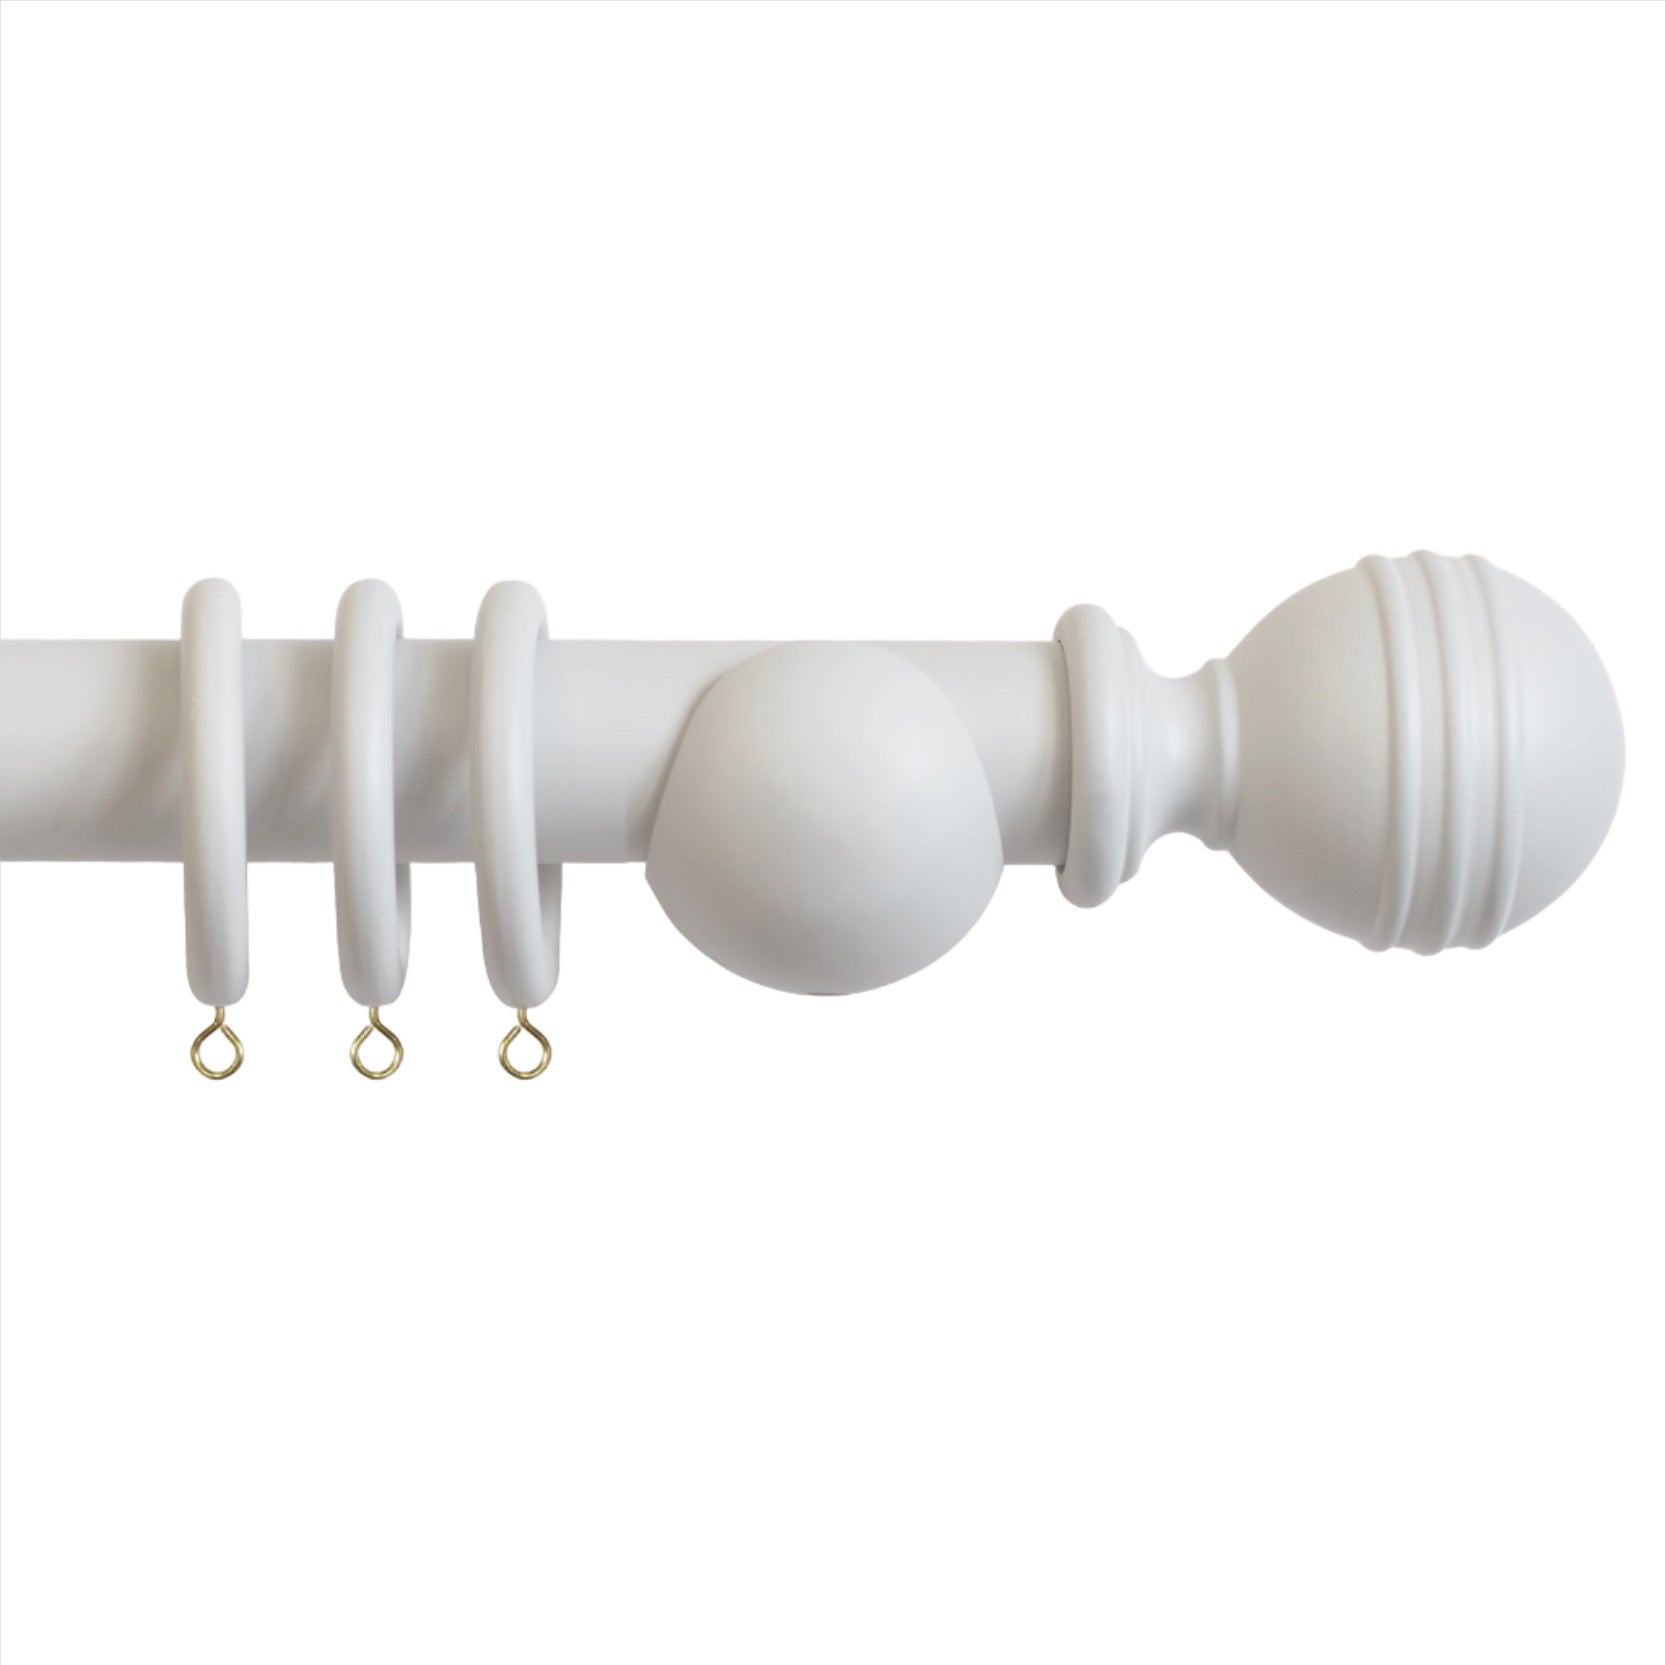 Laura Ashley Wood Ribbed Ball Curtain Pole Set in Pale Dove Grey